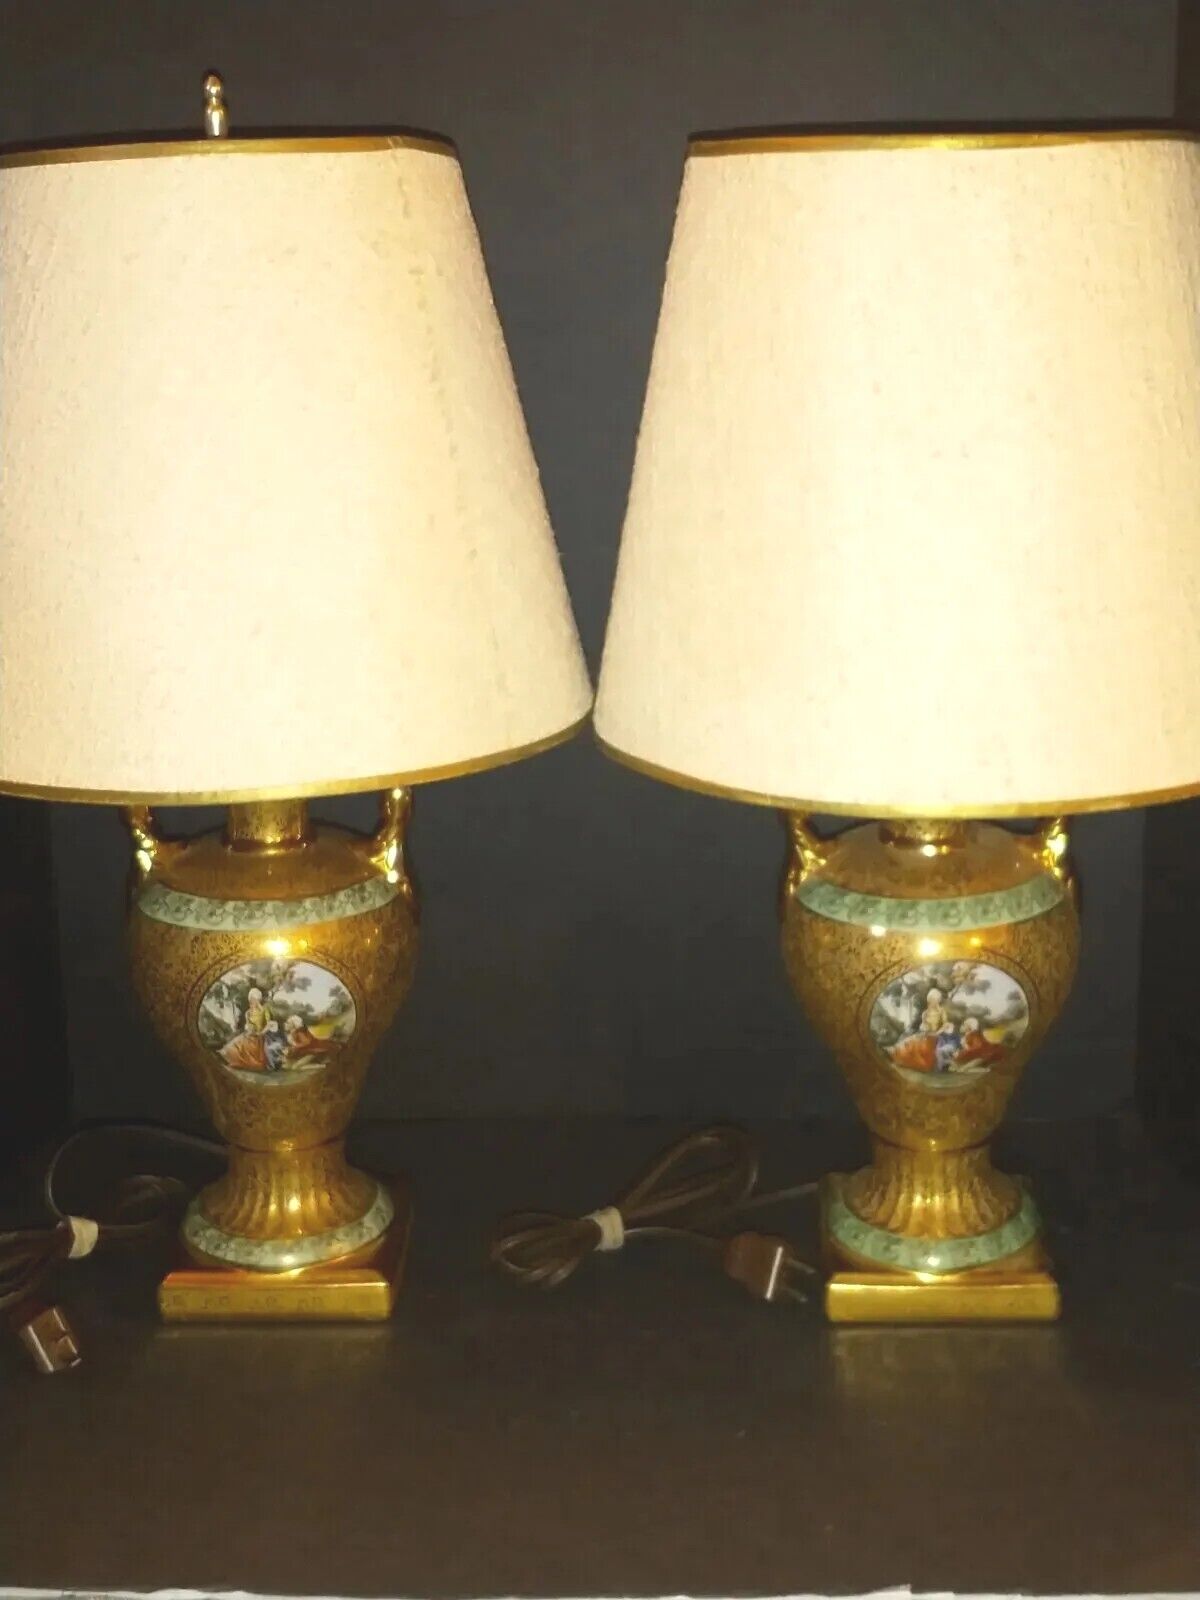 Victorian Era Table Lamp French Renaissance French Colonial Gold Gilt Pair 1940s